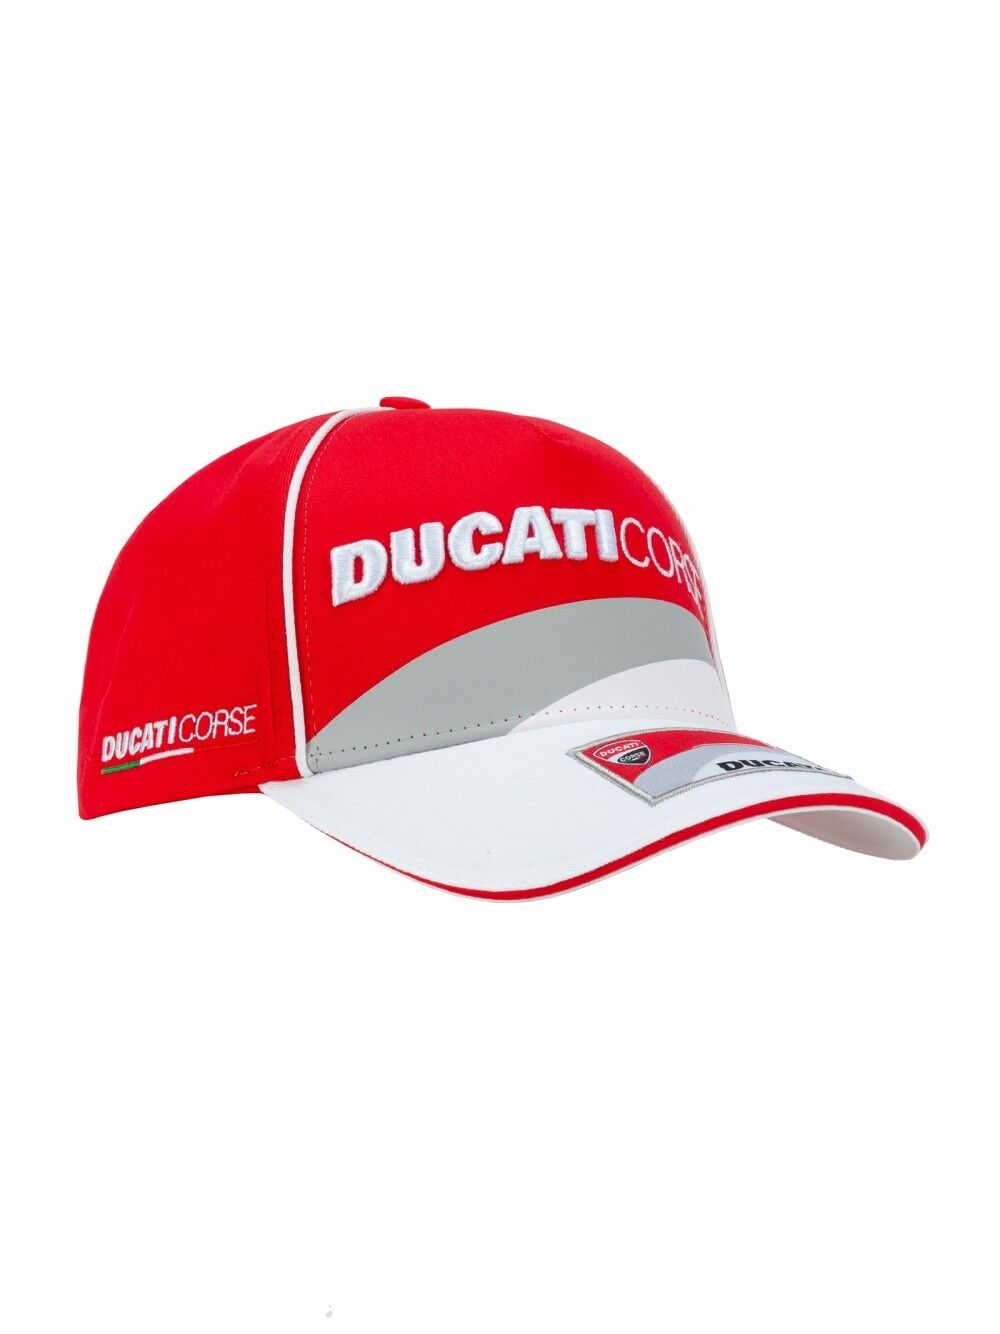 Official Ducati Corse Patch Red Cap - 18 46002